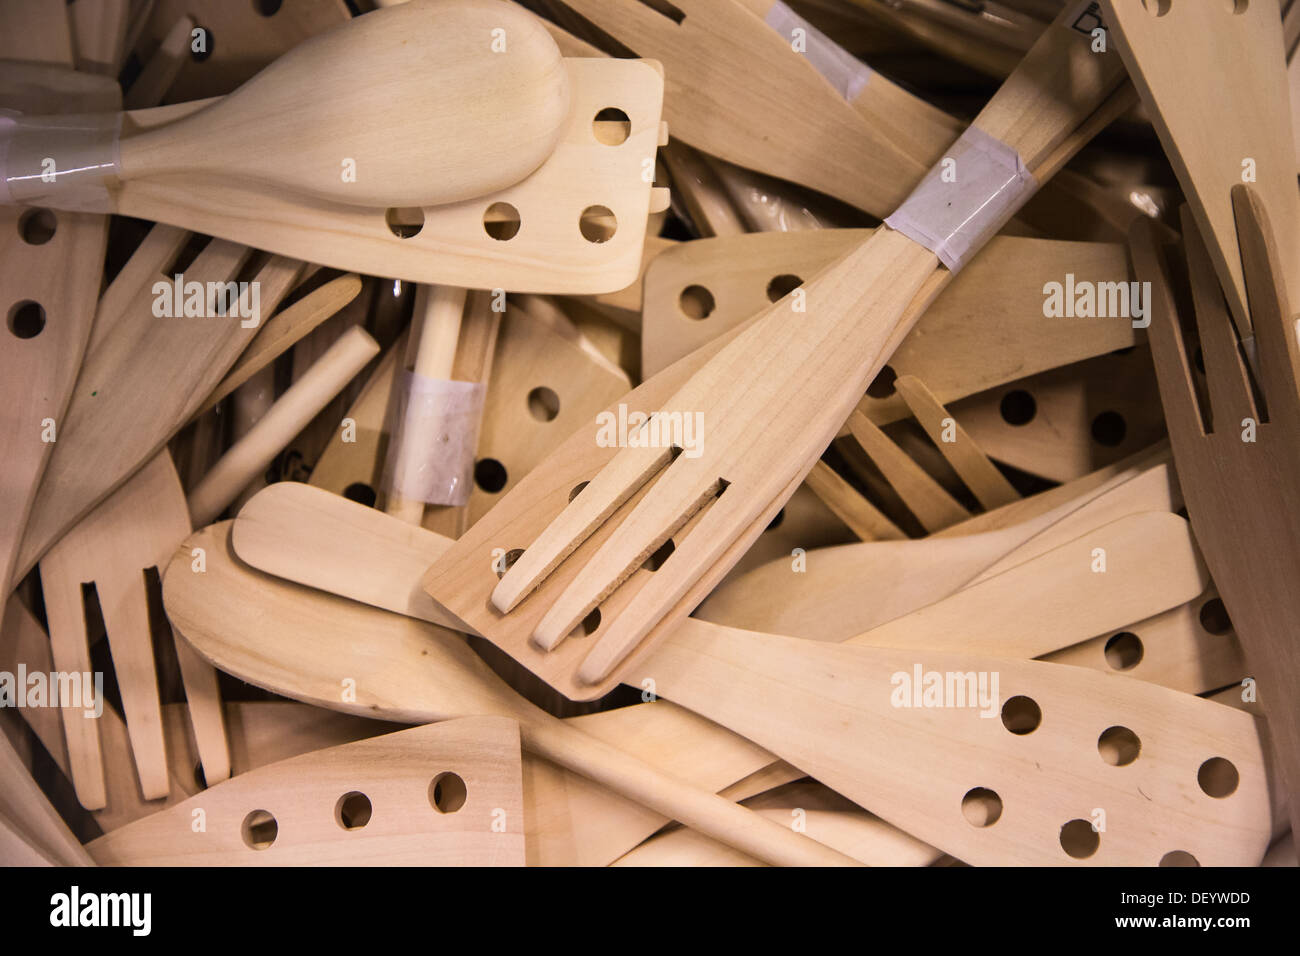 Wooden cooking utensils on display in an IKEA store Stock Photo